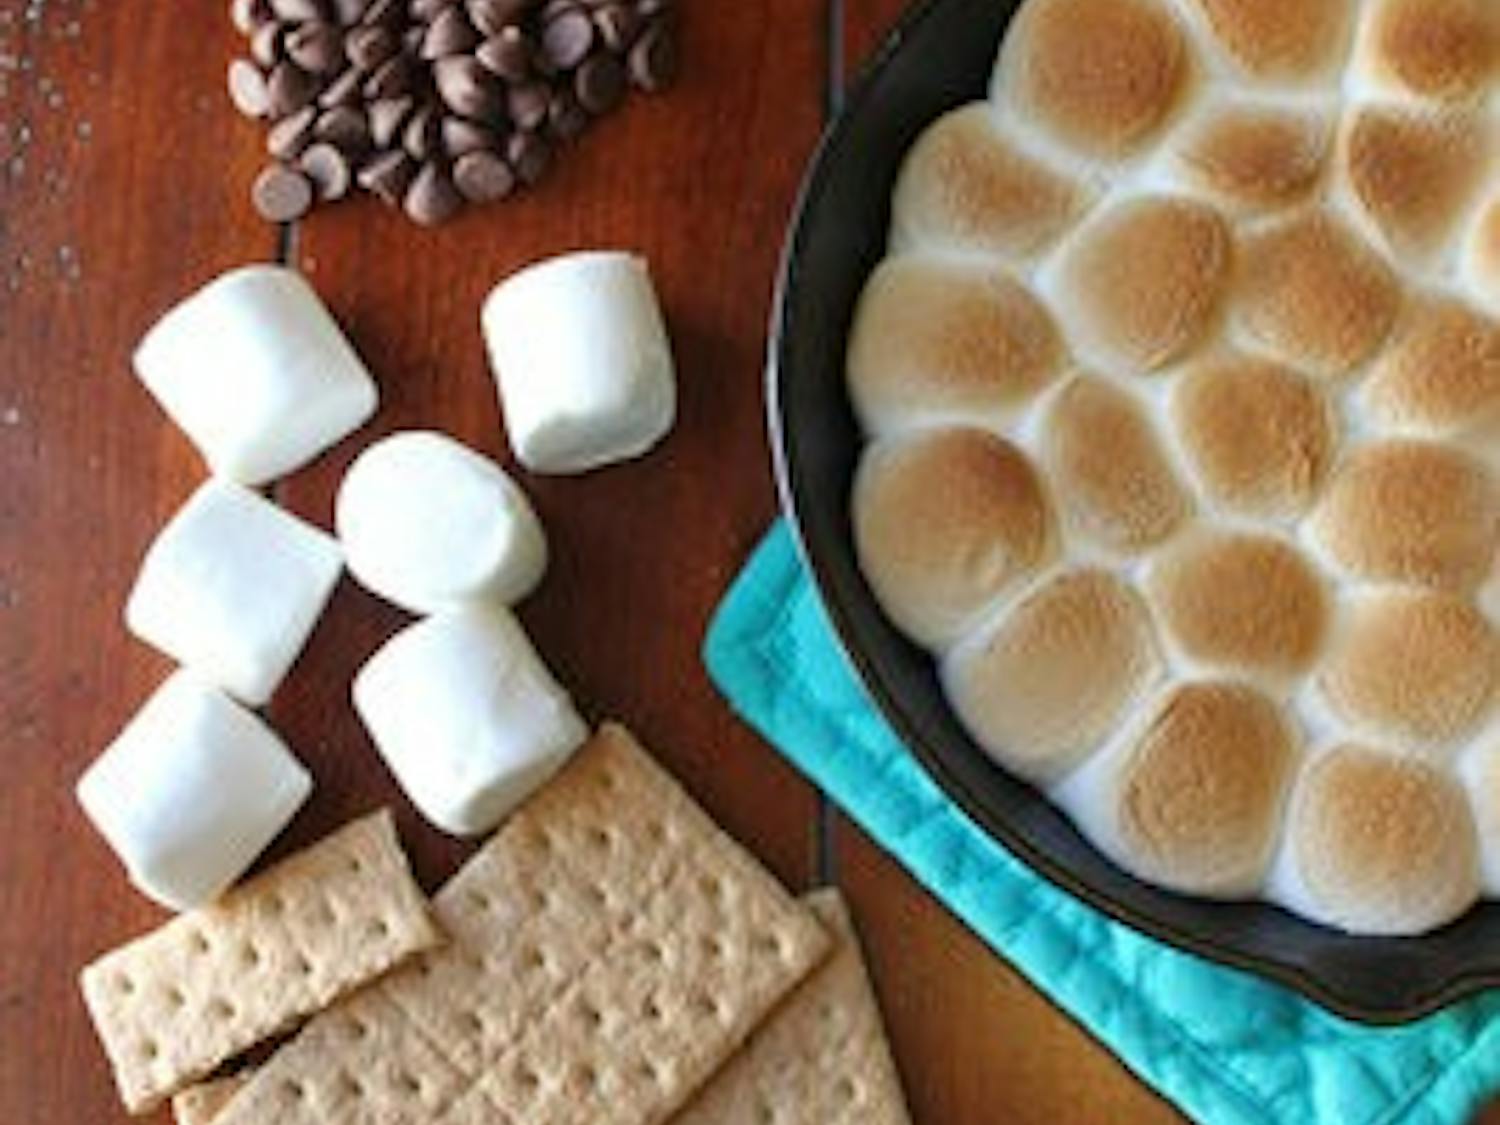 S'mores can be cooked in a pan without a fire.